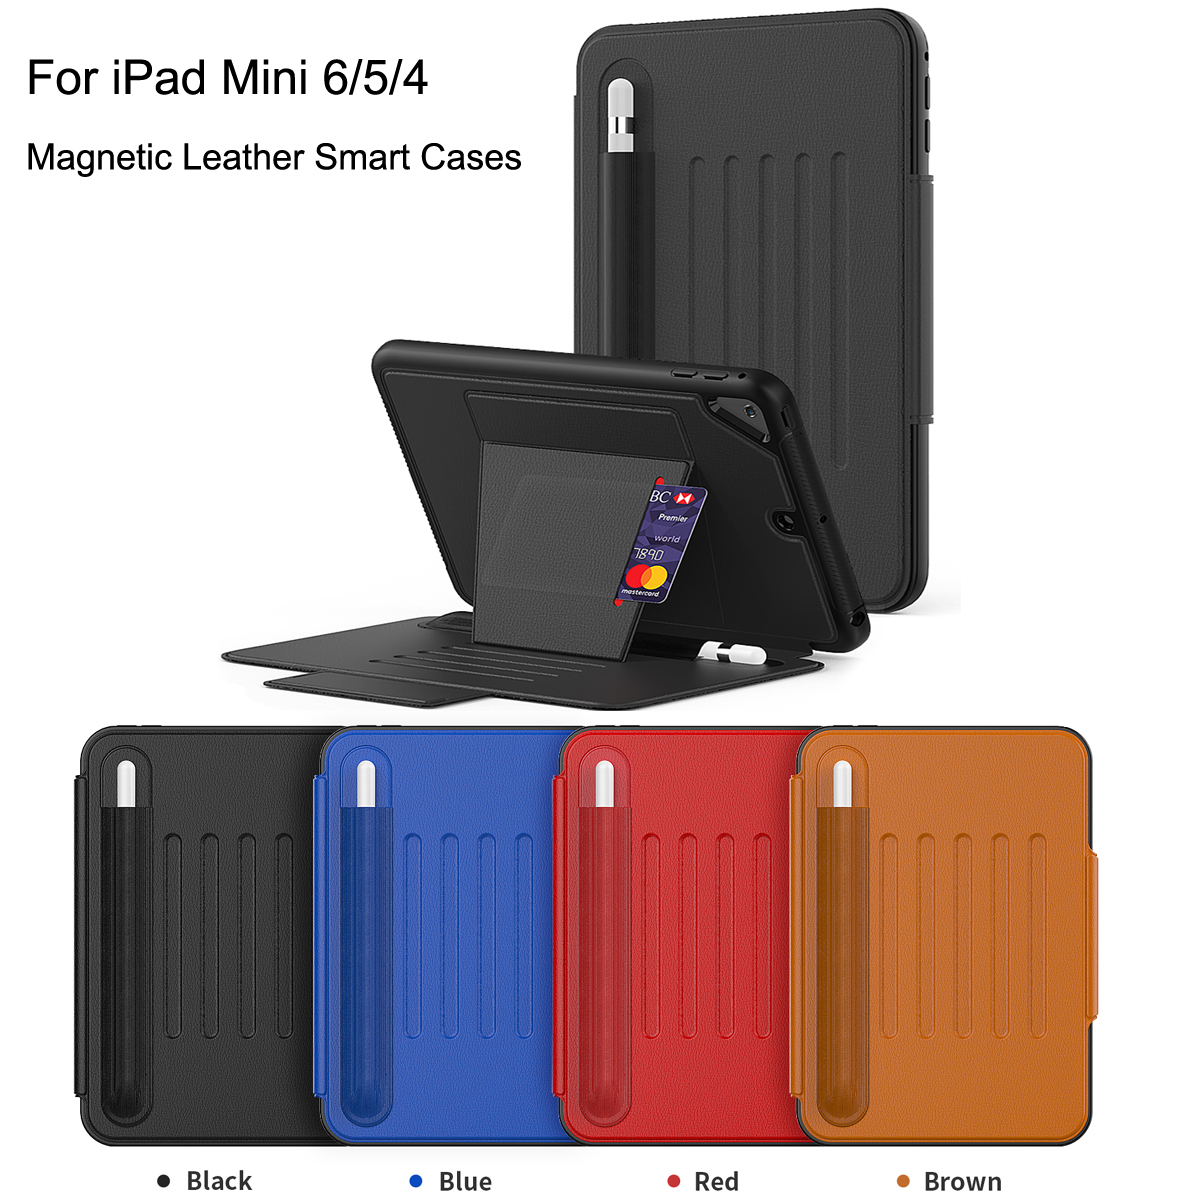 For Apple iPad Mini 4 5 6 6th 8.3 inch Magnetic Smart Cases Leather Folding Flip Slim Lightweight Stand Tablet Cover For Kids Shokclproof Full Body Protective Shell